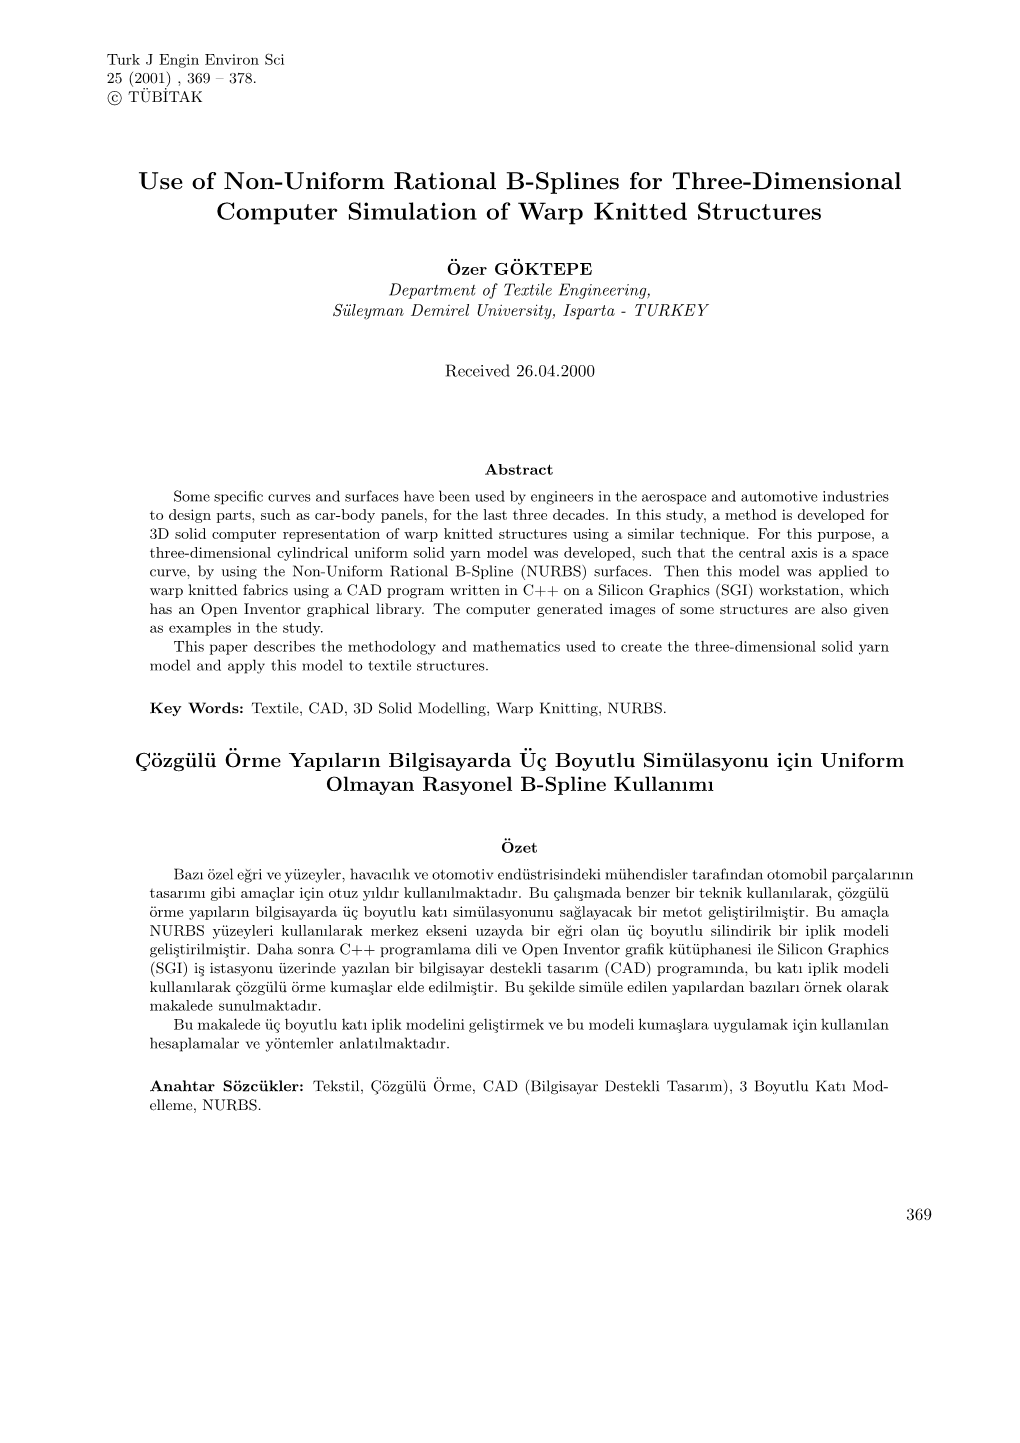 Use of Non-Uniform Rational B-Splines for Three-Dimensional Computer Simulation of Warp Knitted Structures